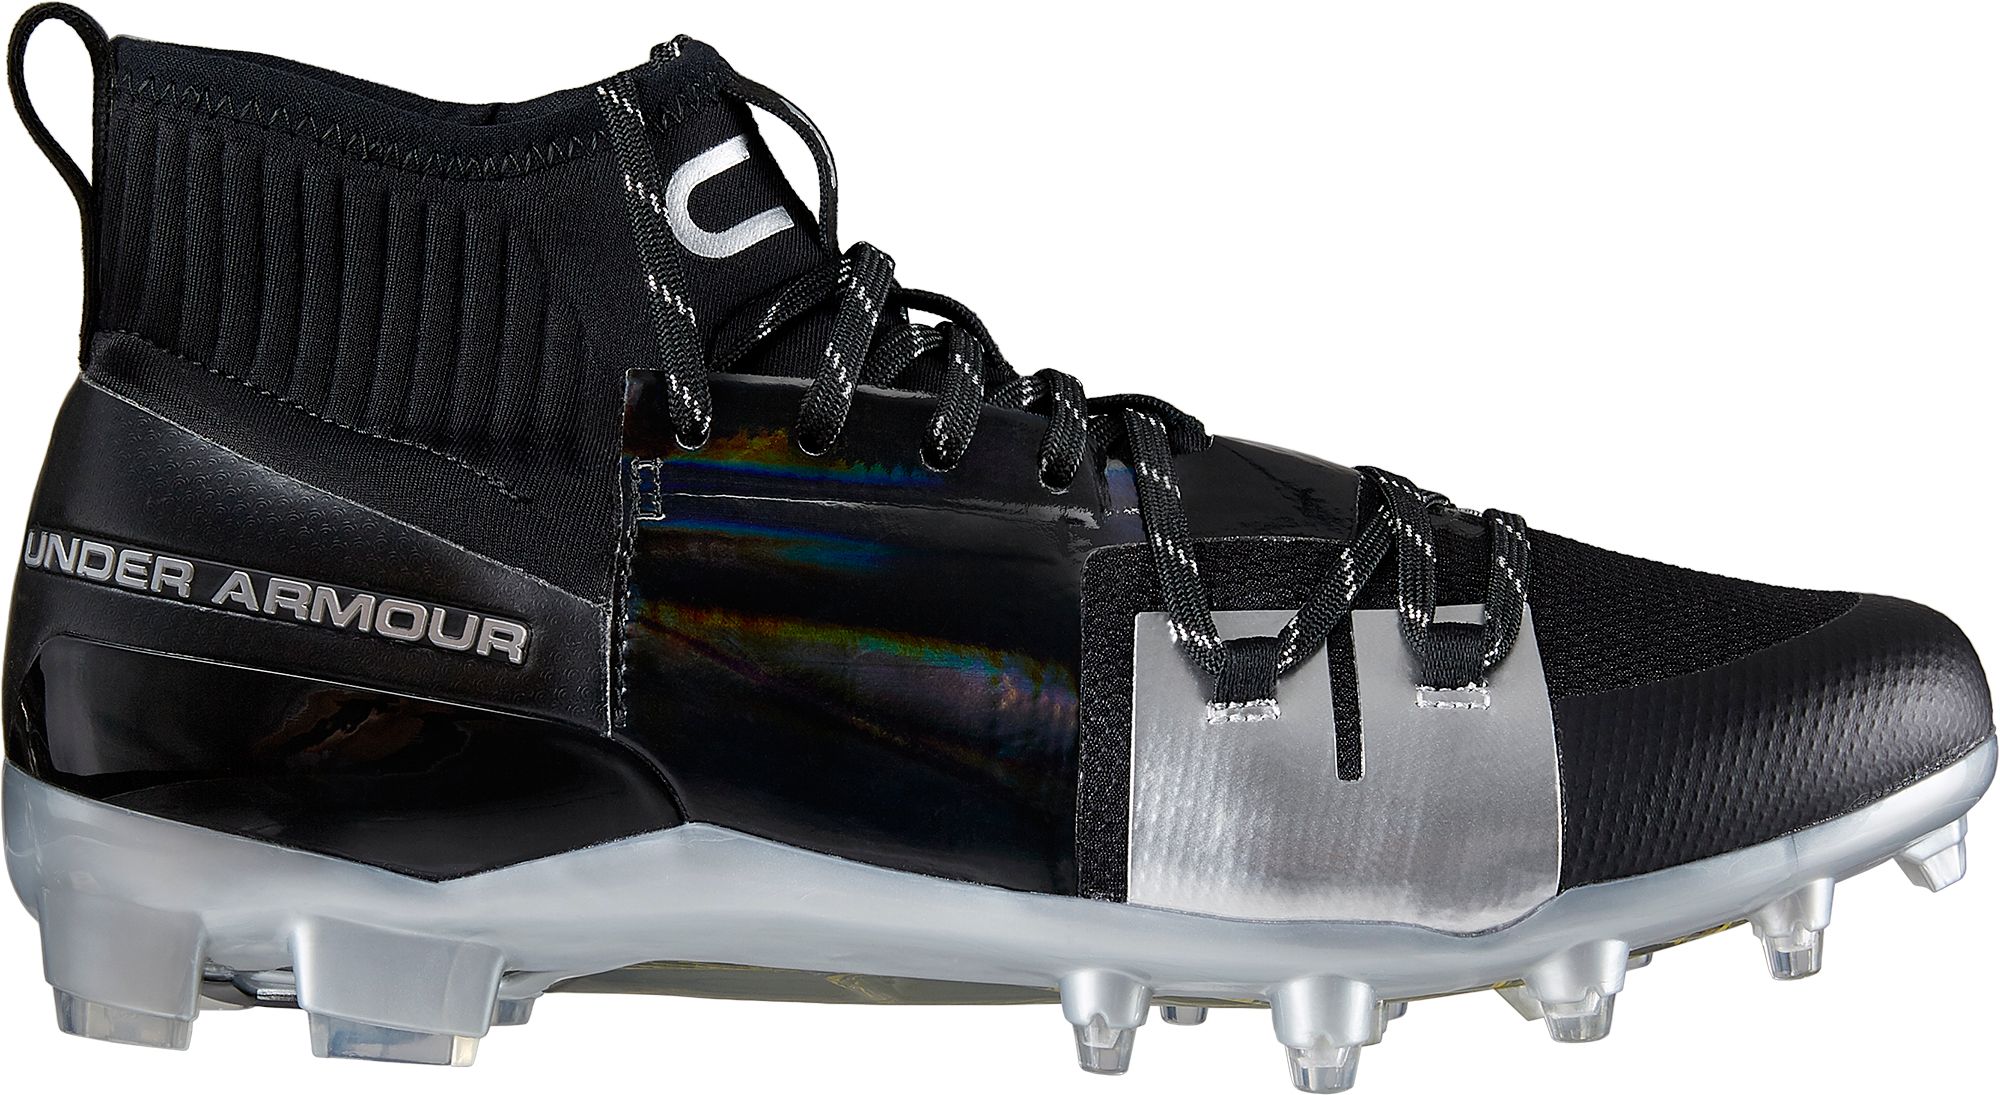 dicks under armour cleats